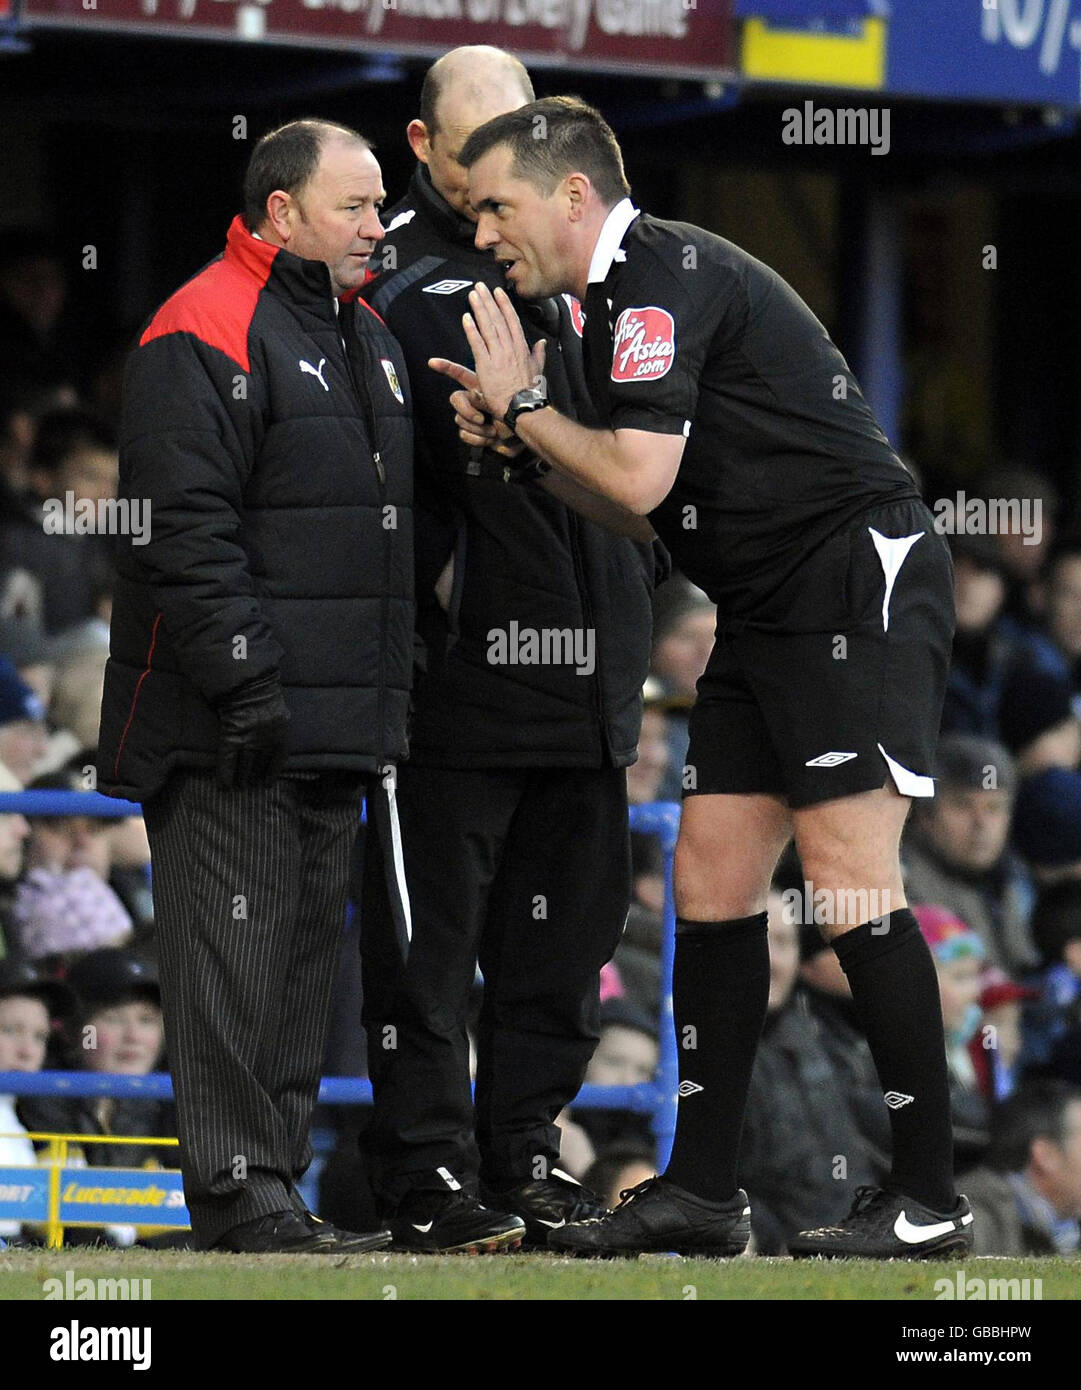 Soccer - FA Cup - Third Round - Portsmouth v Bristol City - Fratton Park. Bristol City manager Gary Johnson is spoken to by referee Phil Dowd (right) during the FA Cup Third Round match at Fratton Park, Portsmouth. Stock Photo